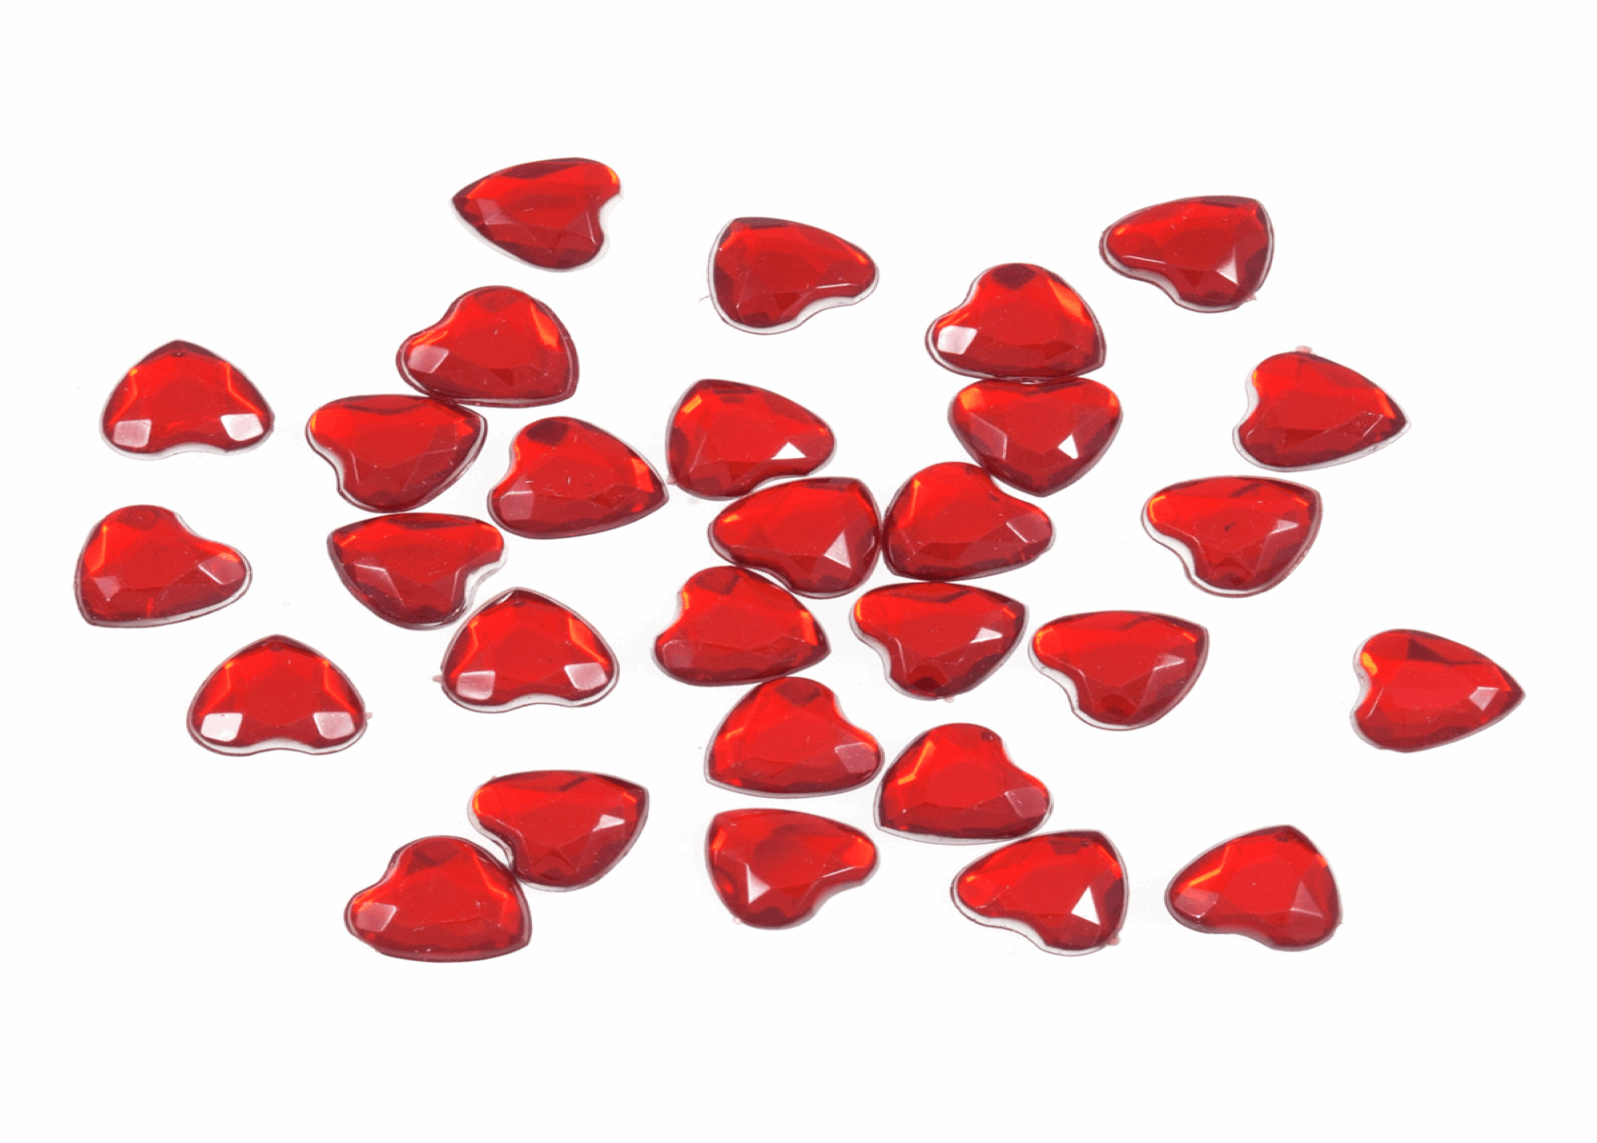 Stick-On Jewels - Red Hearts (Pack of 100)